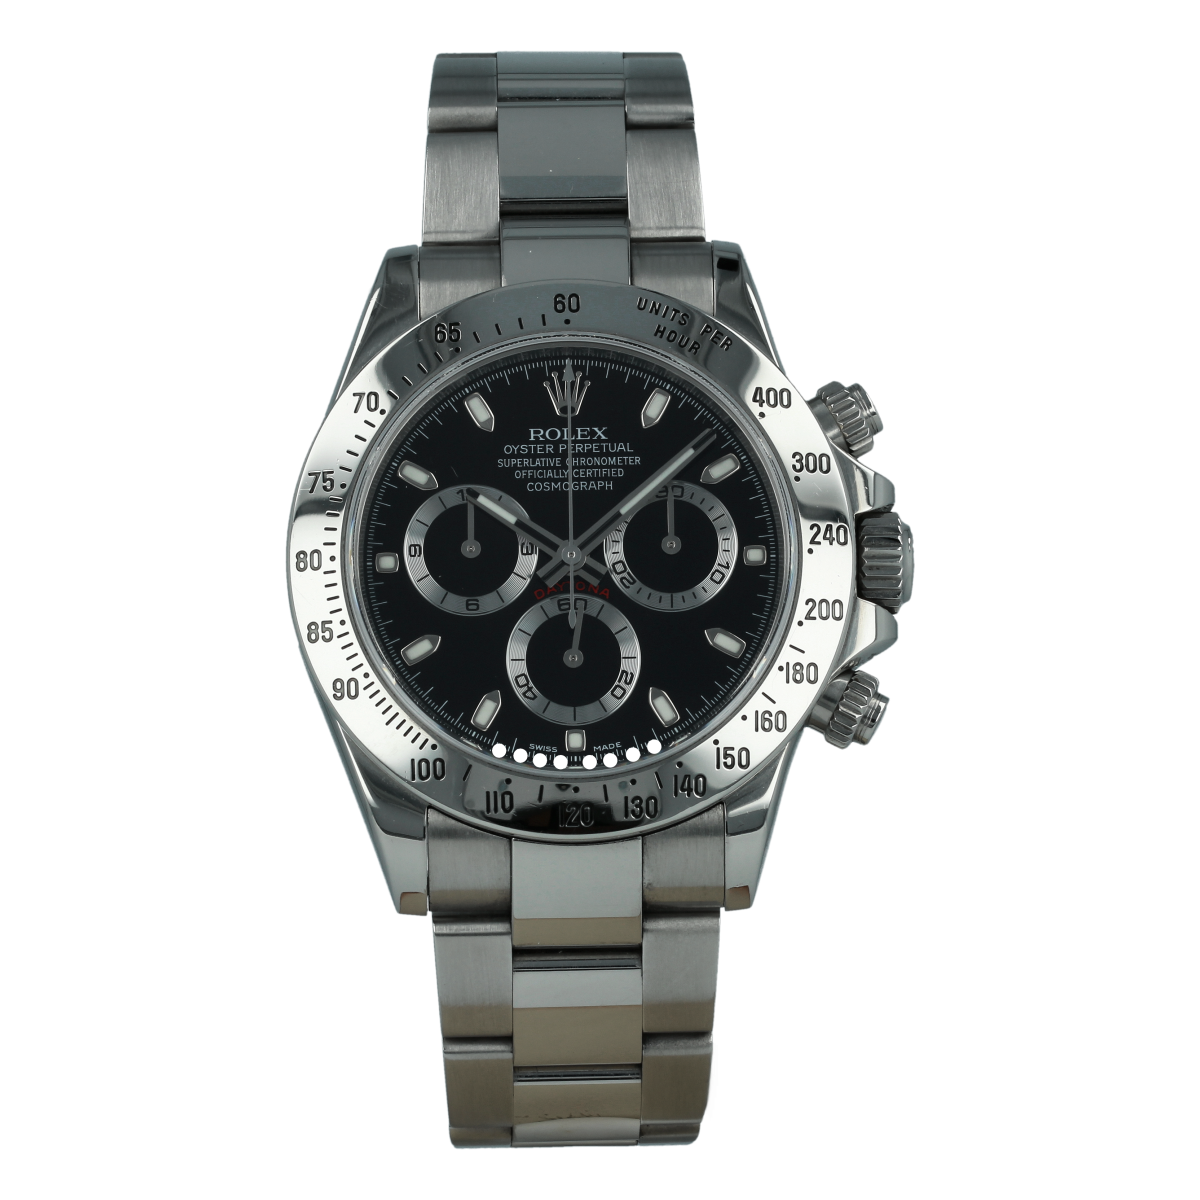 Rolex Cosmograph Daytona 116520 Black Dial *Full Set, Unpolished* | Buy pre-owned Rolex watch